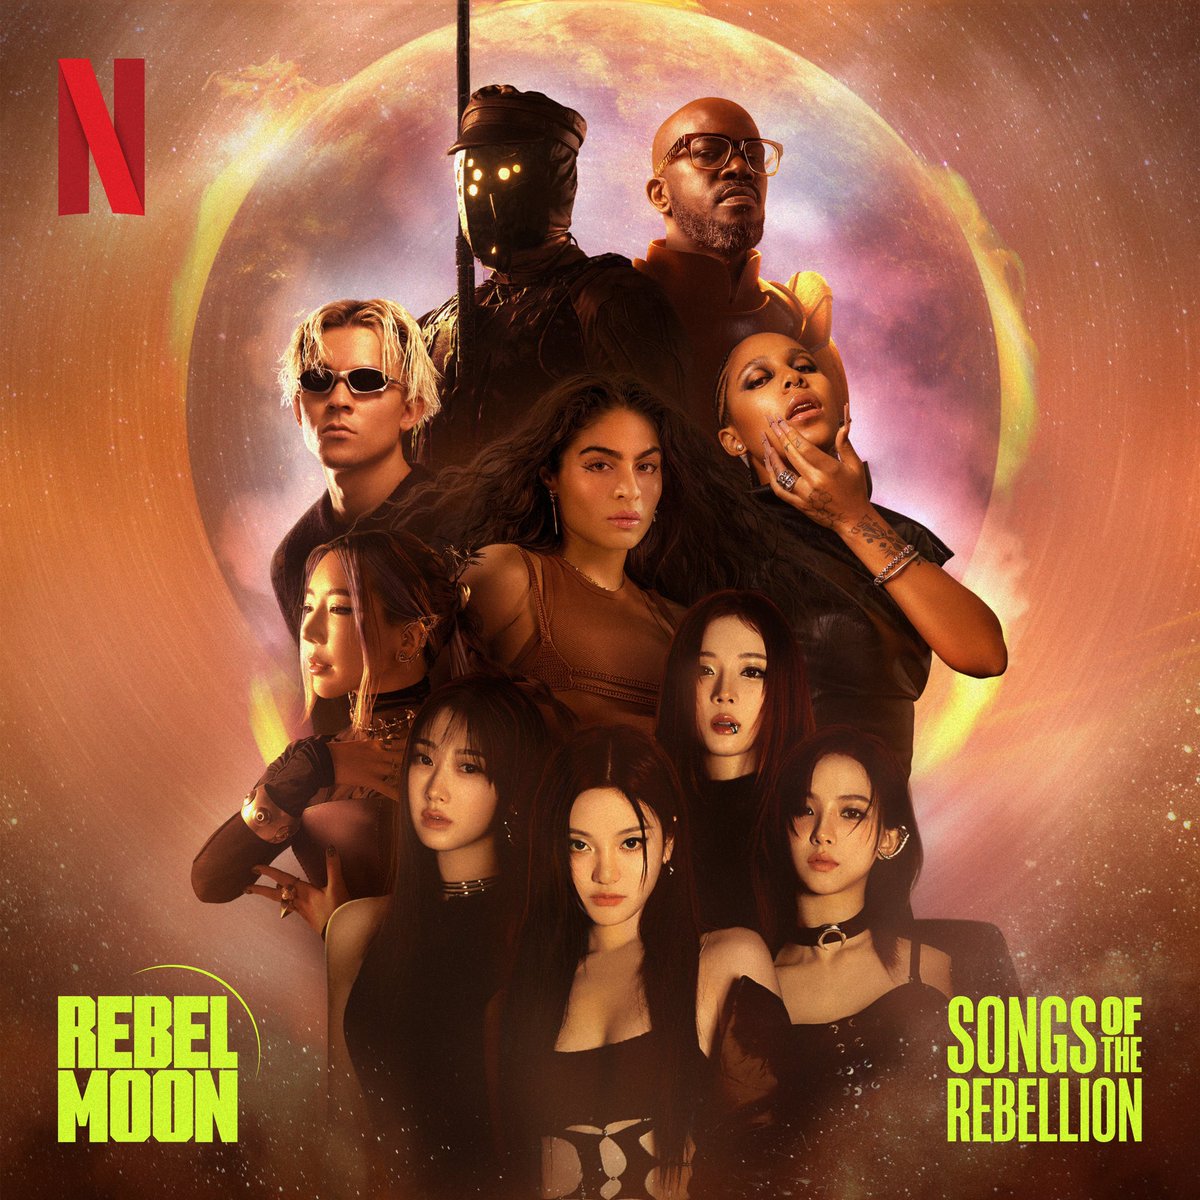 Rebel Moon: Songs of the Rebellion is out now. Rebel Moon Part Two: The Scargiver premieres April 19th. 🔗 netflixmusic.ffm.to/songsoftherebe… #Netflix #RebelMoon #OST #DieTrying @tokimonsta @rebelmoon @netflix